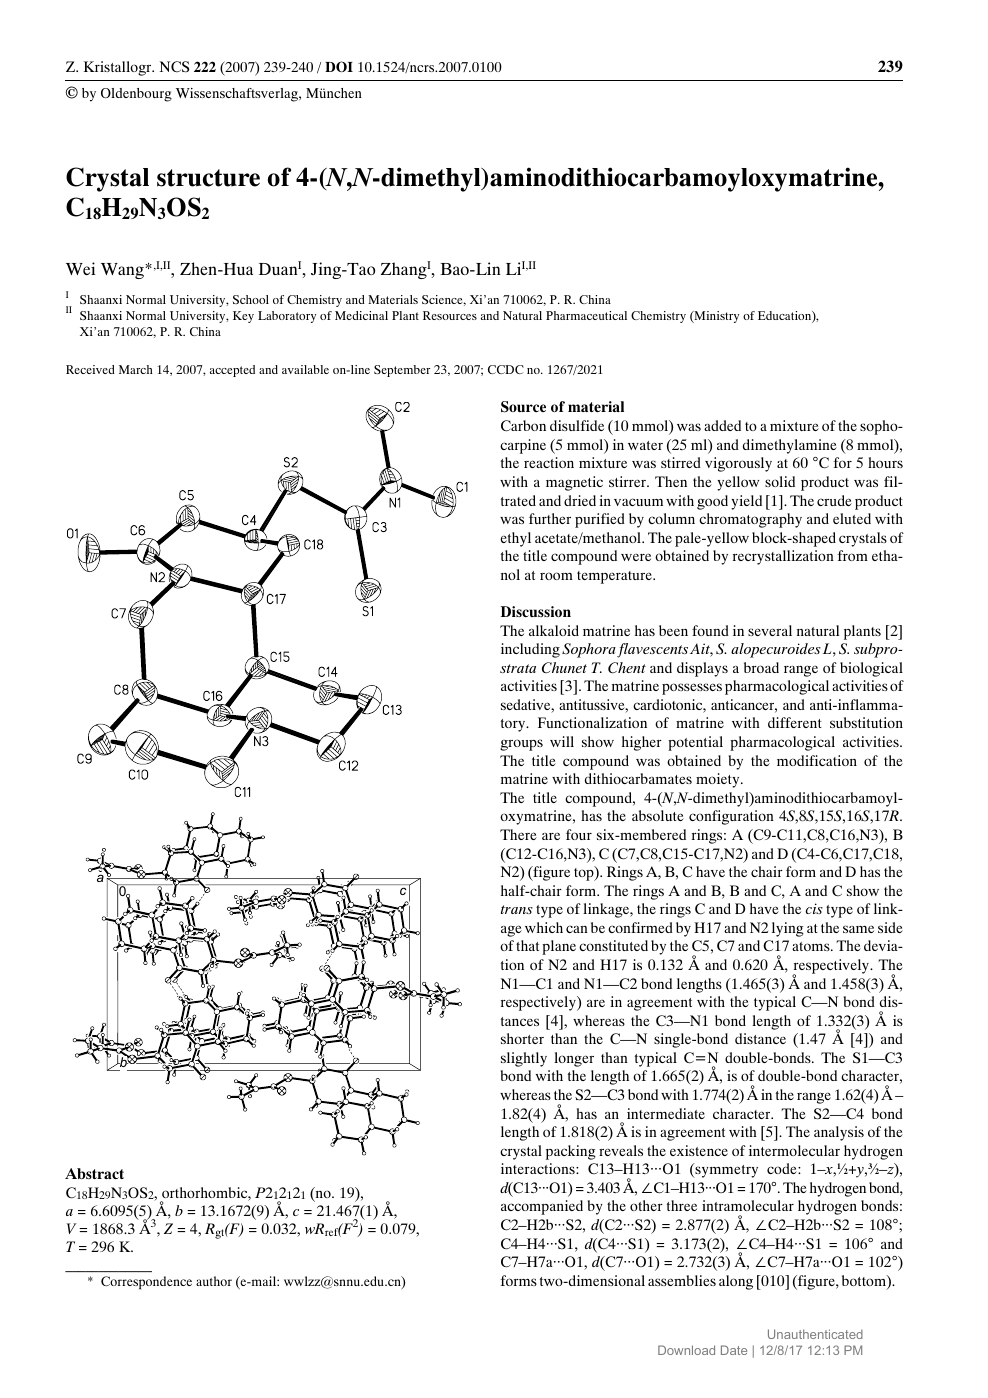 Crystal Structure Of 4 N N Dimethyl Aminodithiocarbamoyloxymatrine C18h29n3os2 Topic Of Research Paper In Chemical Sciences Download Scholarly Article Pdf And Read For Free On Cyberleninka Open Science Hub